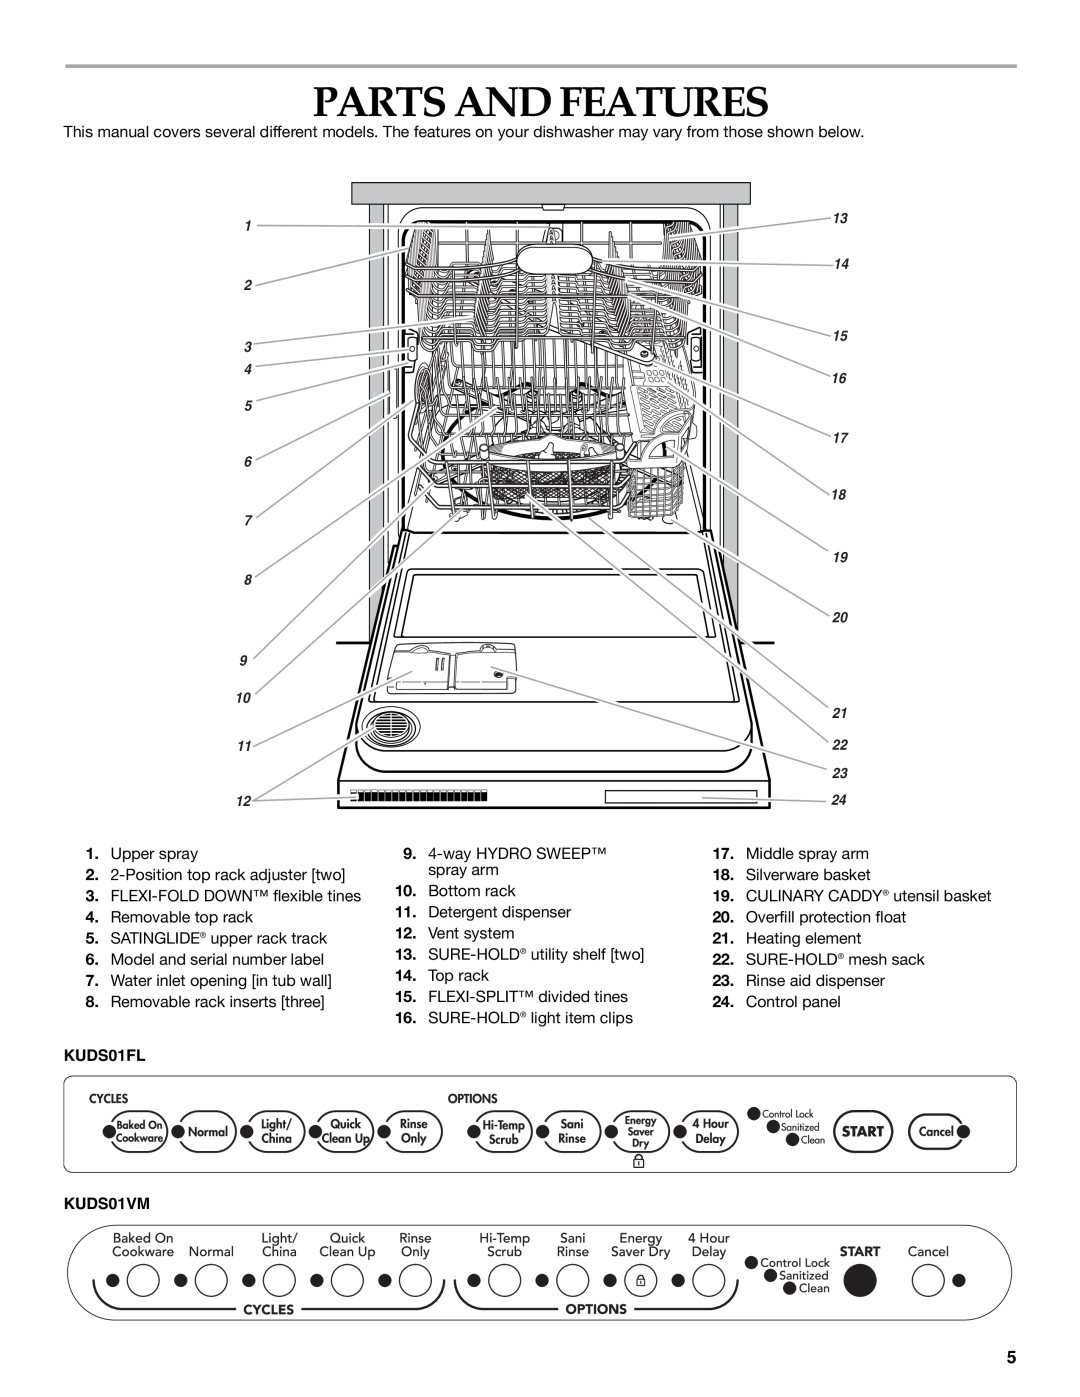 KitchenAid manual Parts And Features, KUDS01FL KUDS01VM 